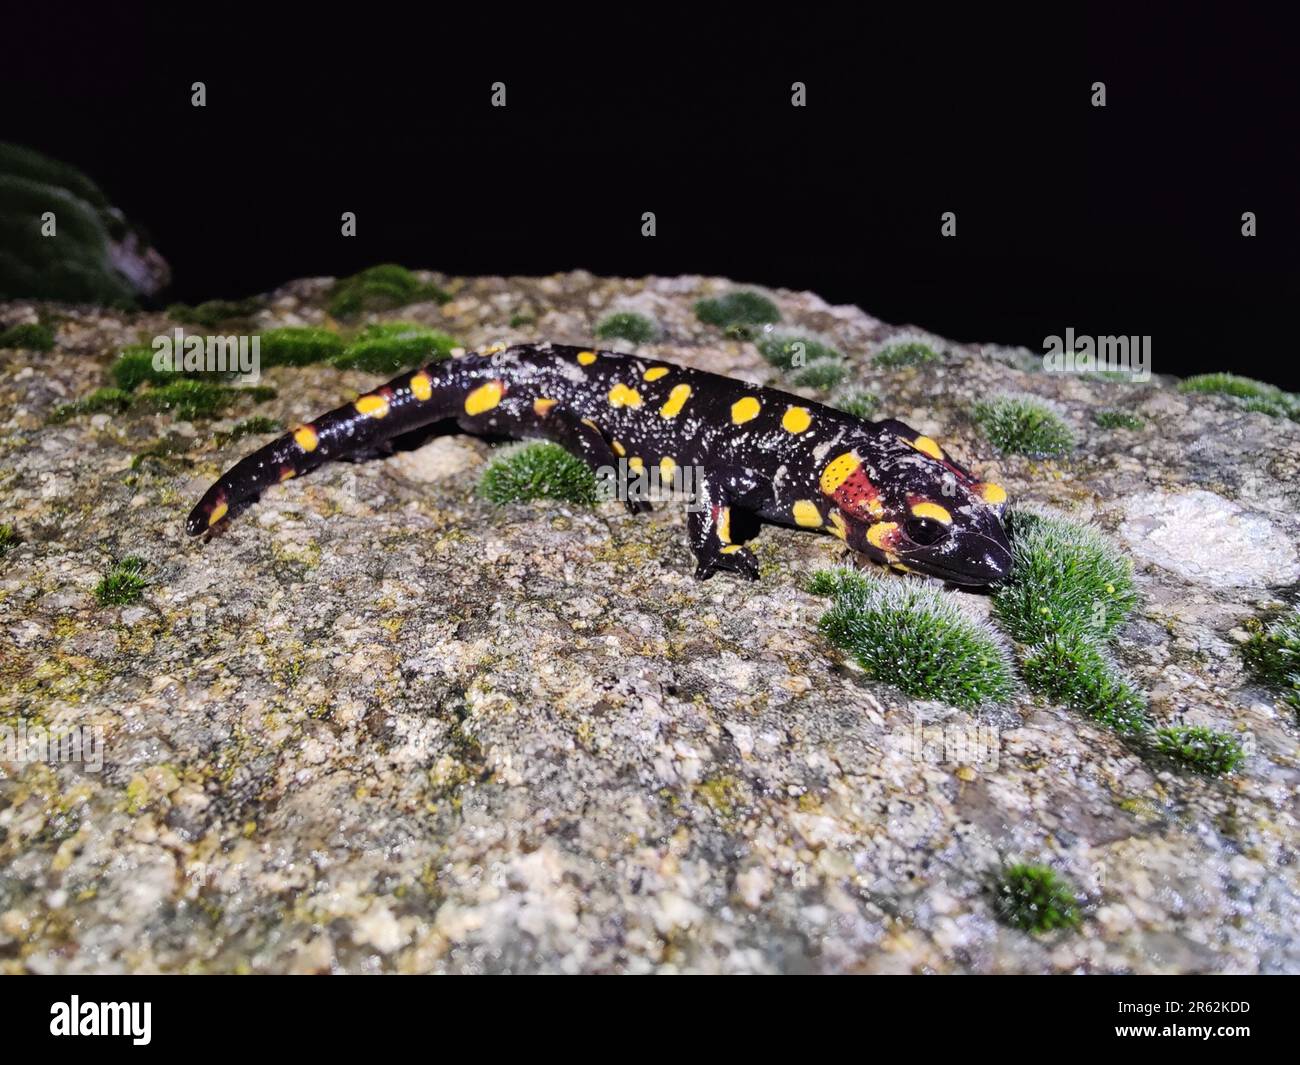 A vibrant orange spotted fire salamander with distinct yellow spots and striking red feet perched atop a rocky surface Stock Photo